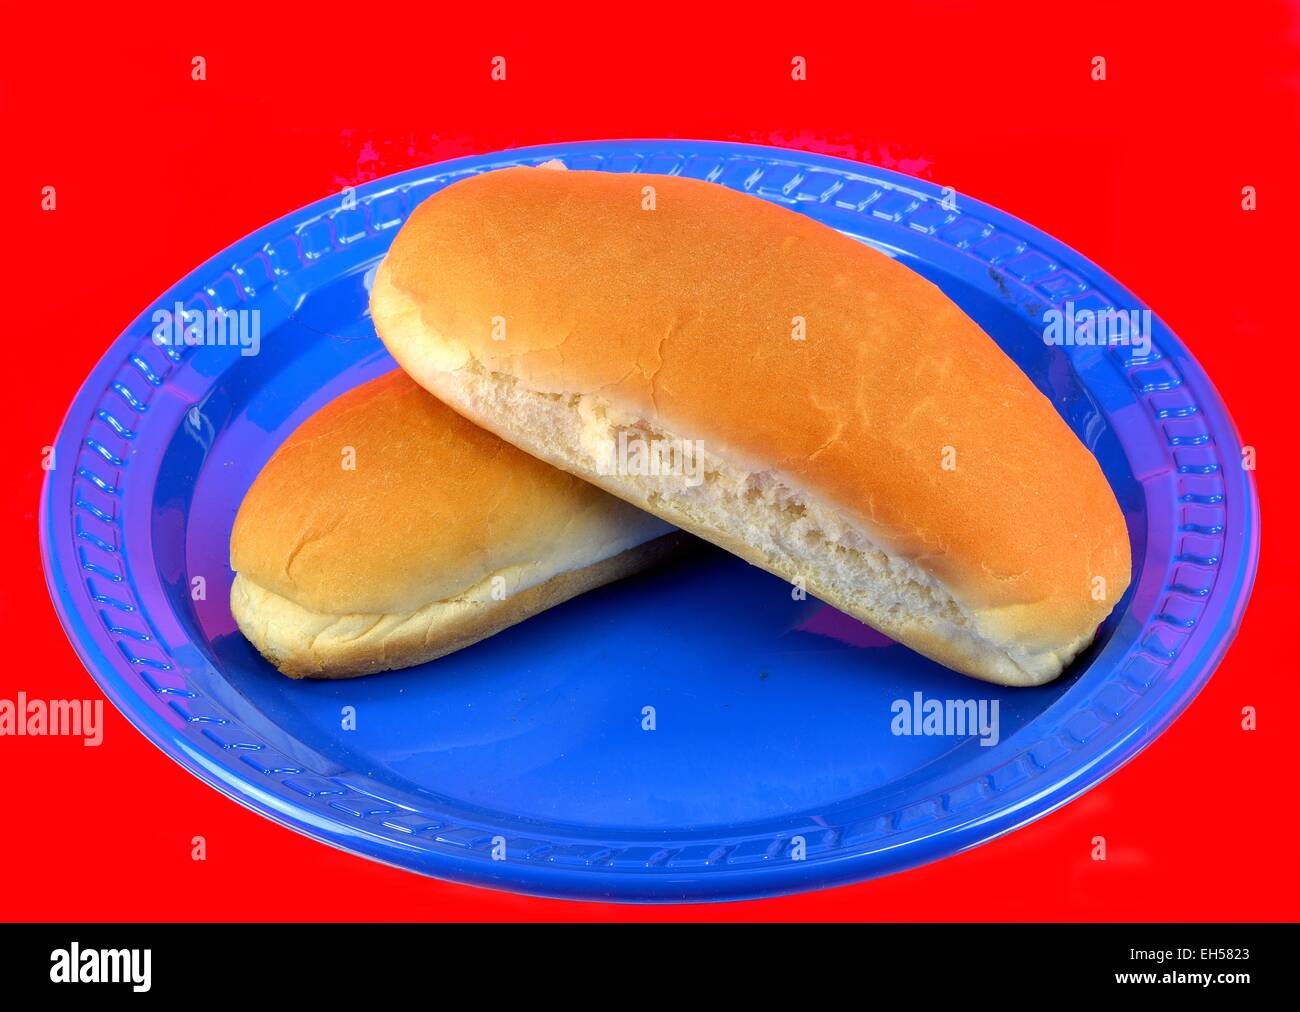 Hot dog bun on a blue plate on a red background. Stock Photo